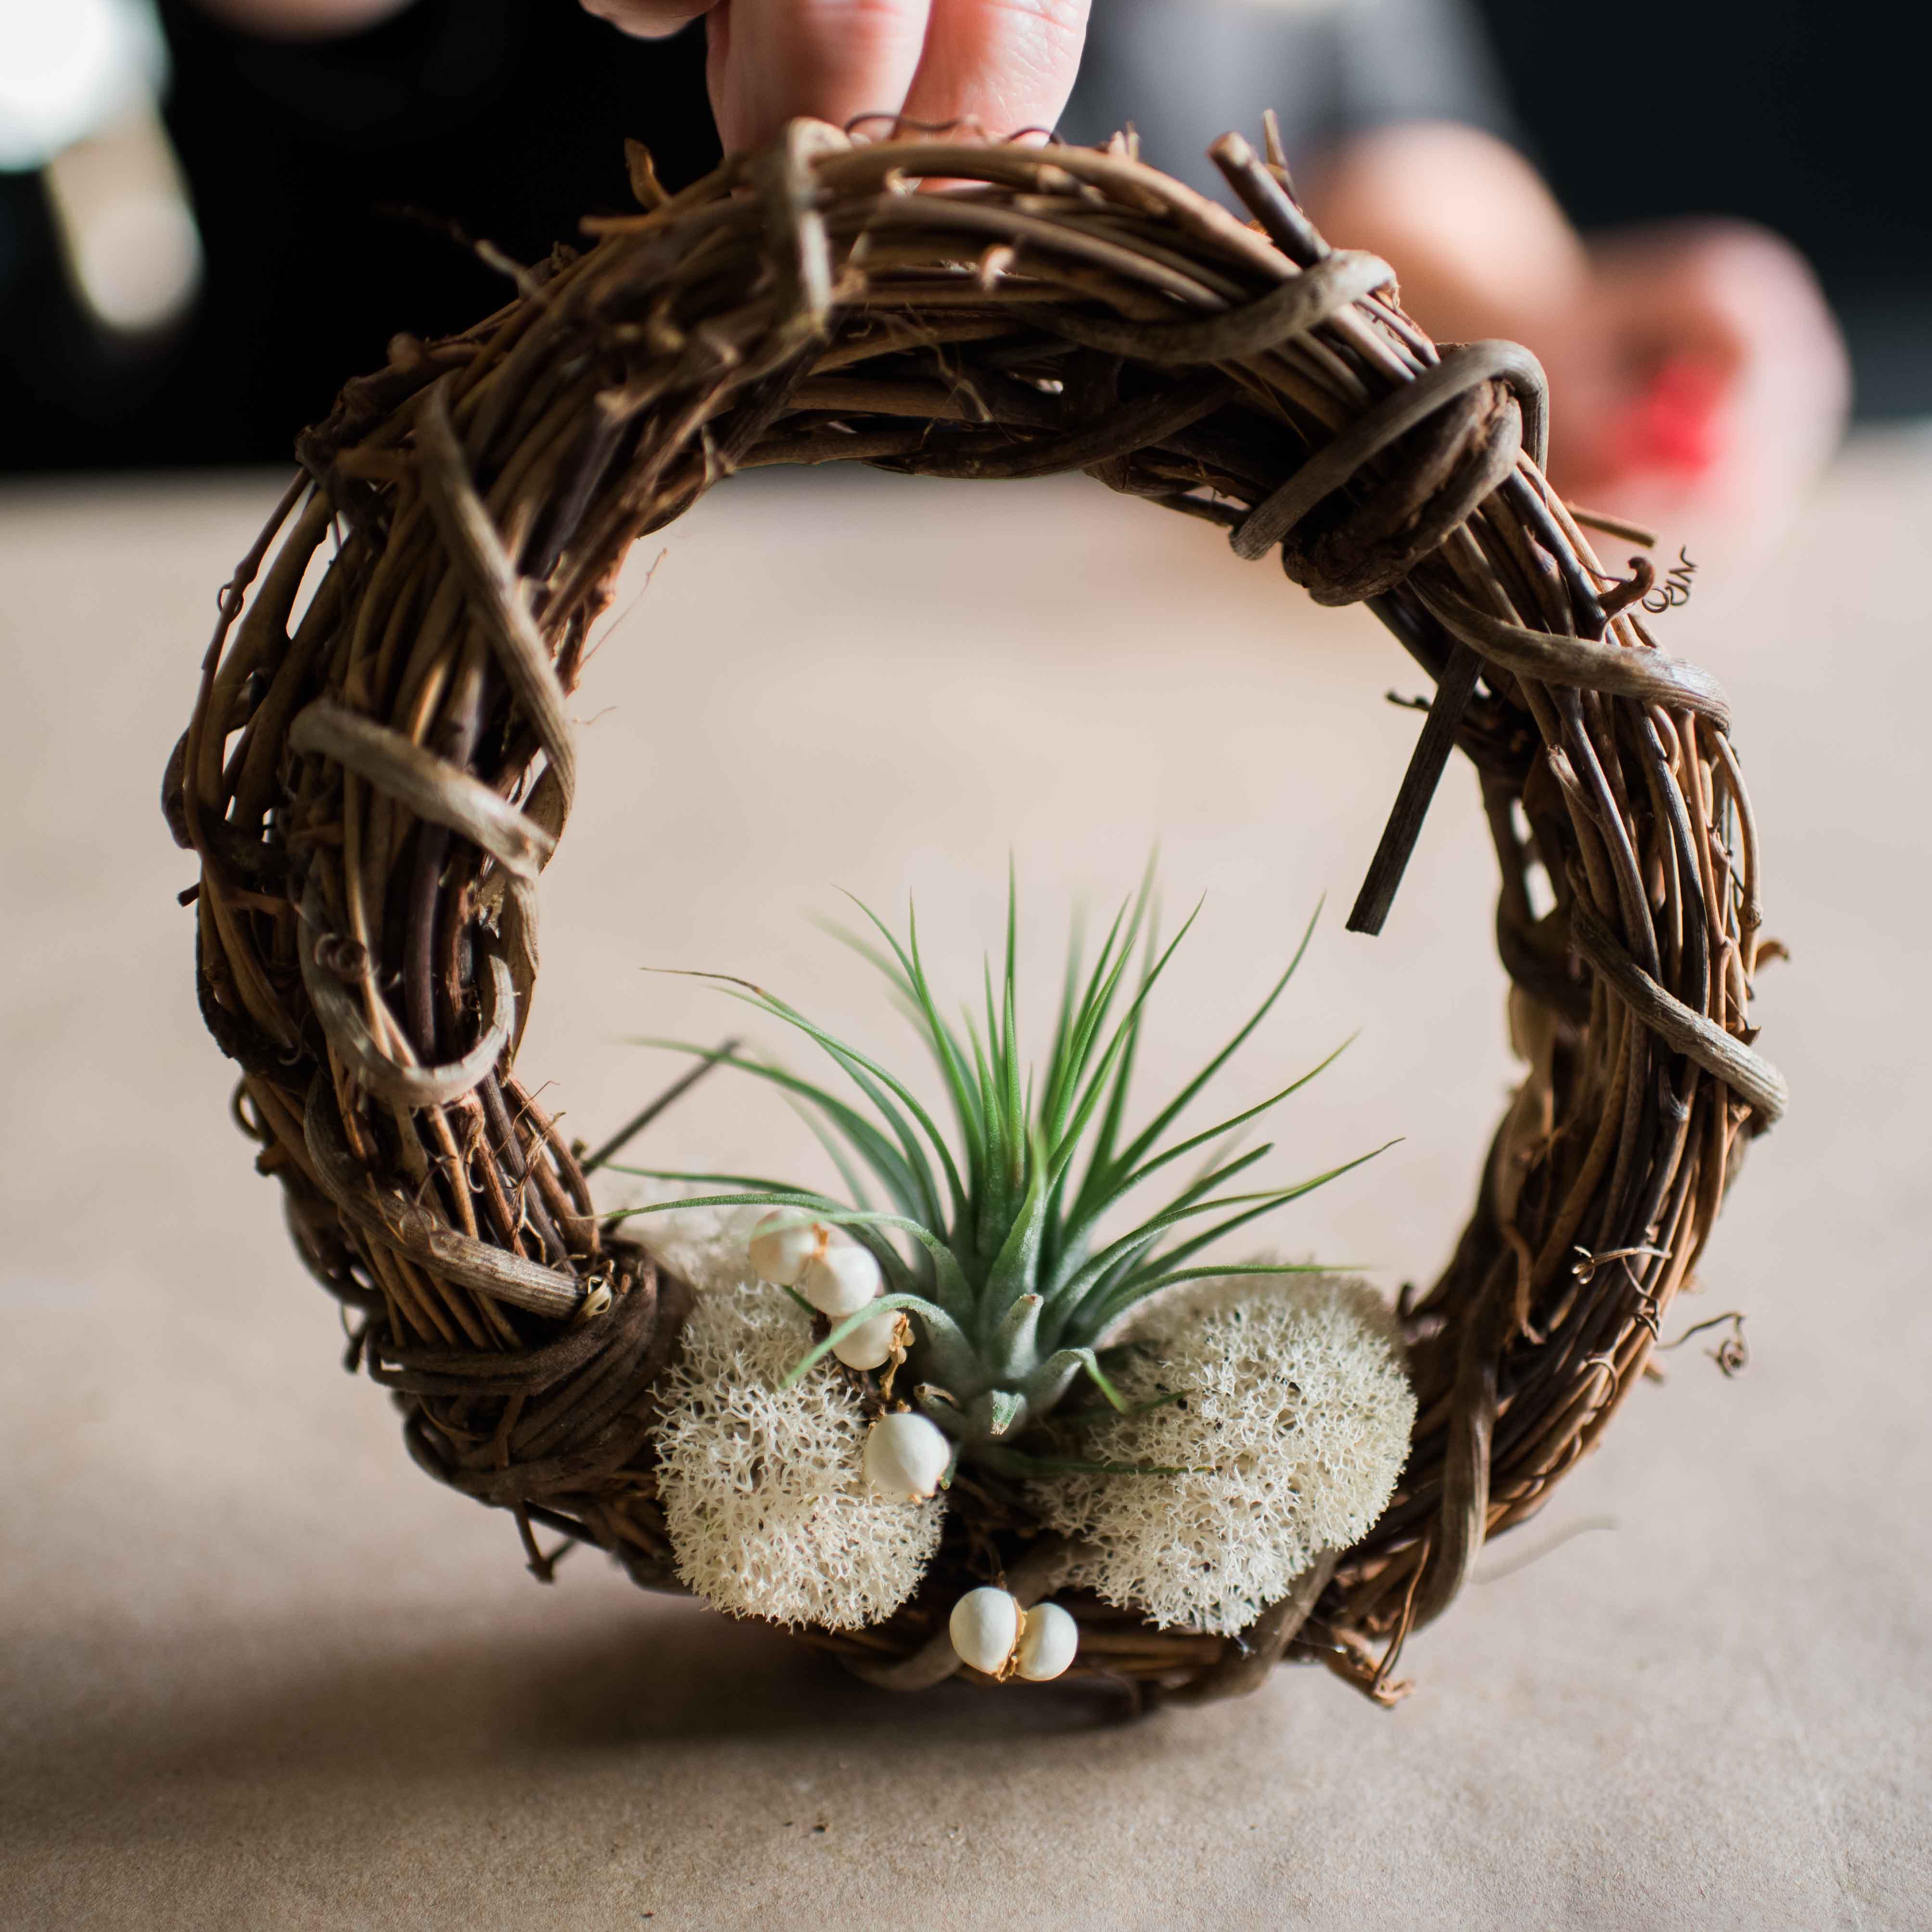 Create your very own Living Wreath with Air Plants and a pre-made 6” grapevine wreath body. These arrangements are a modern approach to the traditional wreath. With Air plants, they become more easily adaptable to the indoors year-round. Made from grapevine trimmings from the California wine country, moss, dried flowers and drought tolerant air plants.